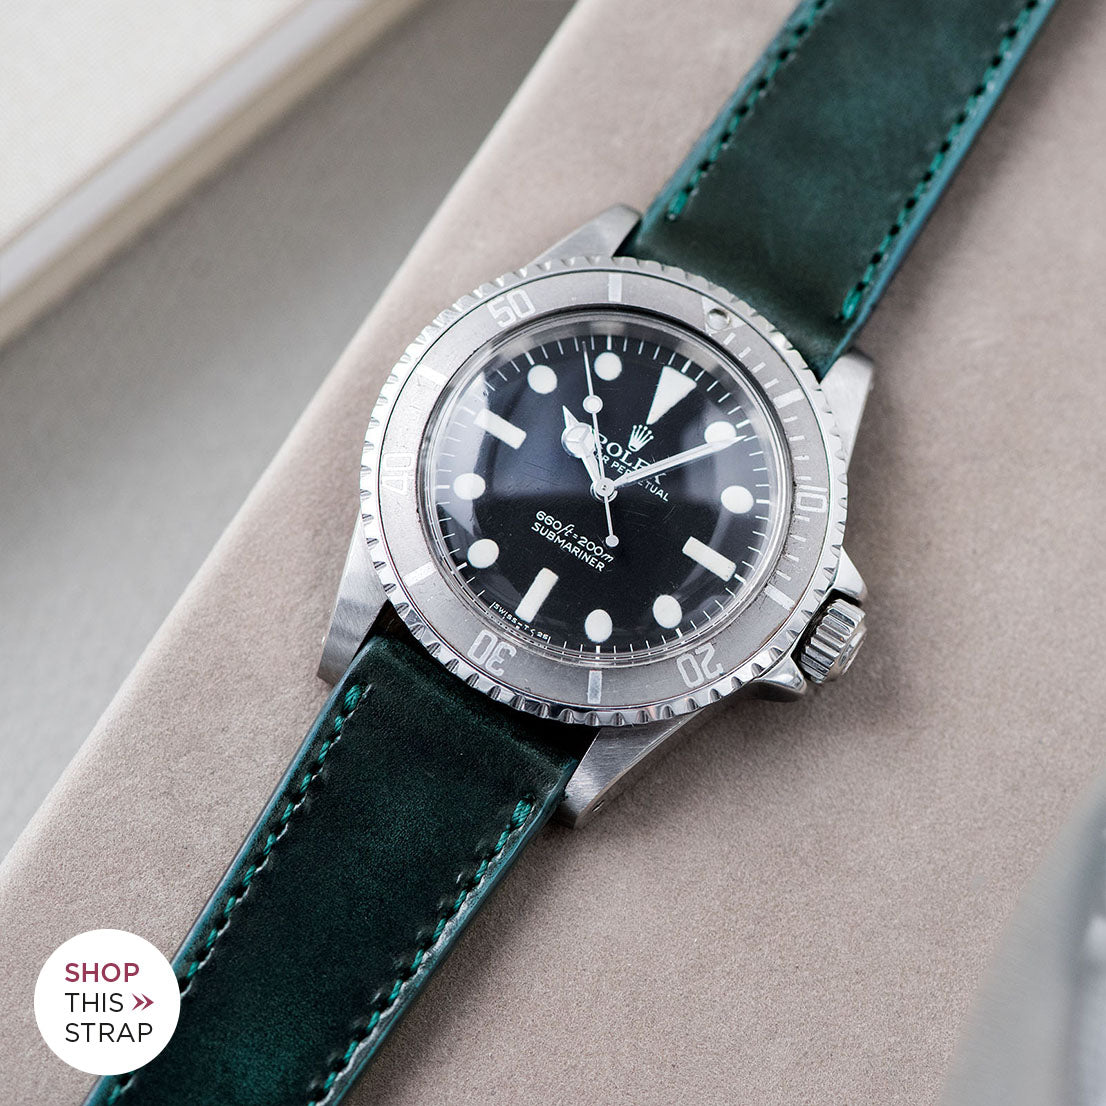 Bulang and Sons_Strap Guide_The Rolex 5513 Faded Maxi Submariner_Degrade Copper Green Leather Watch Strap